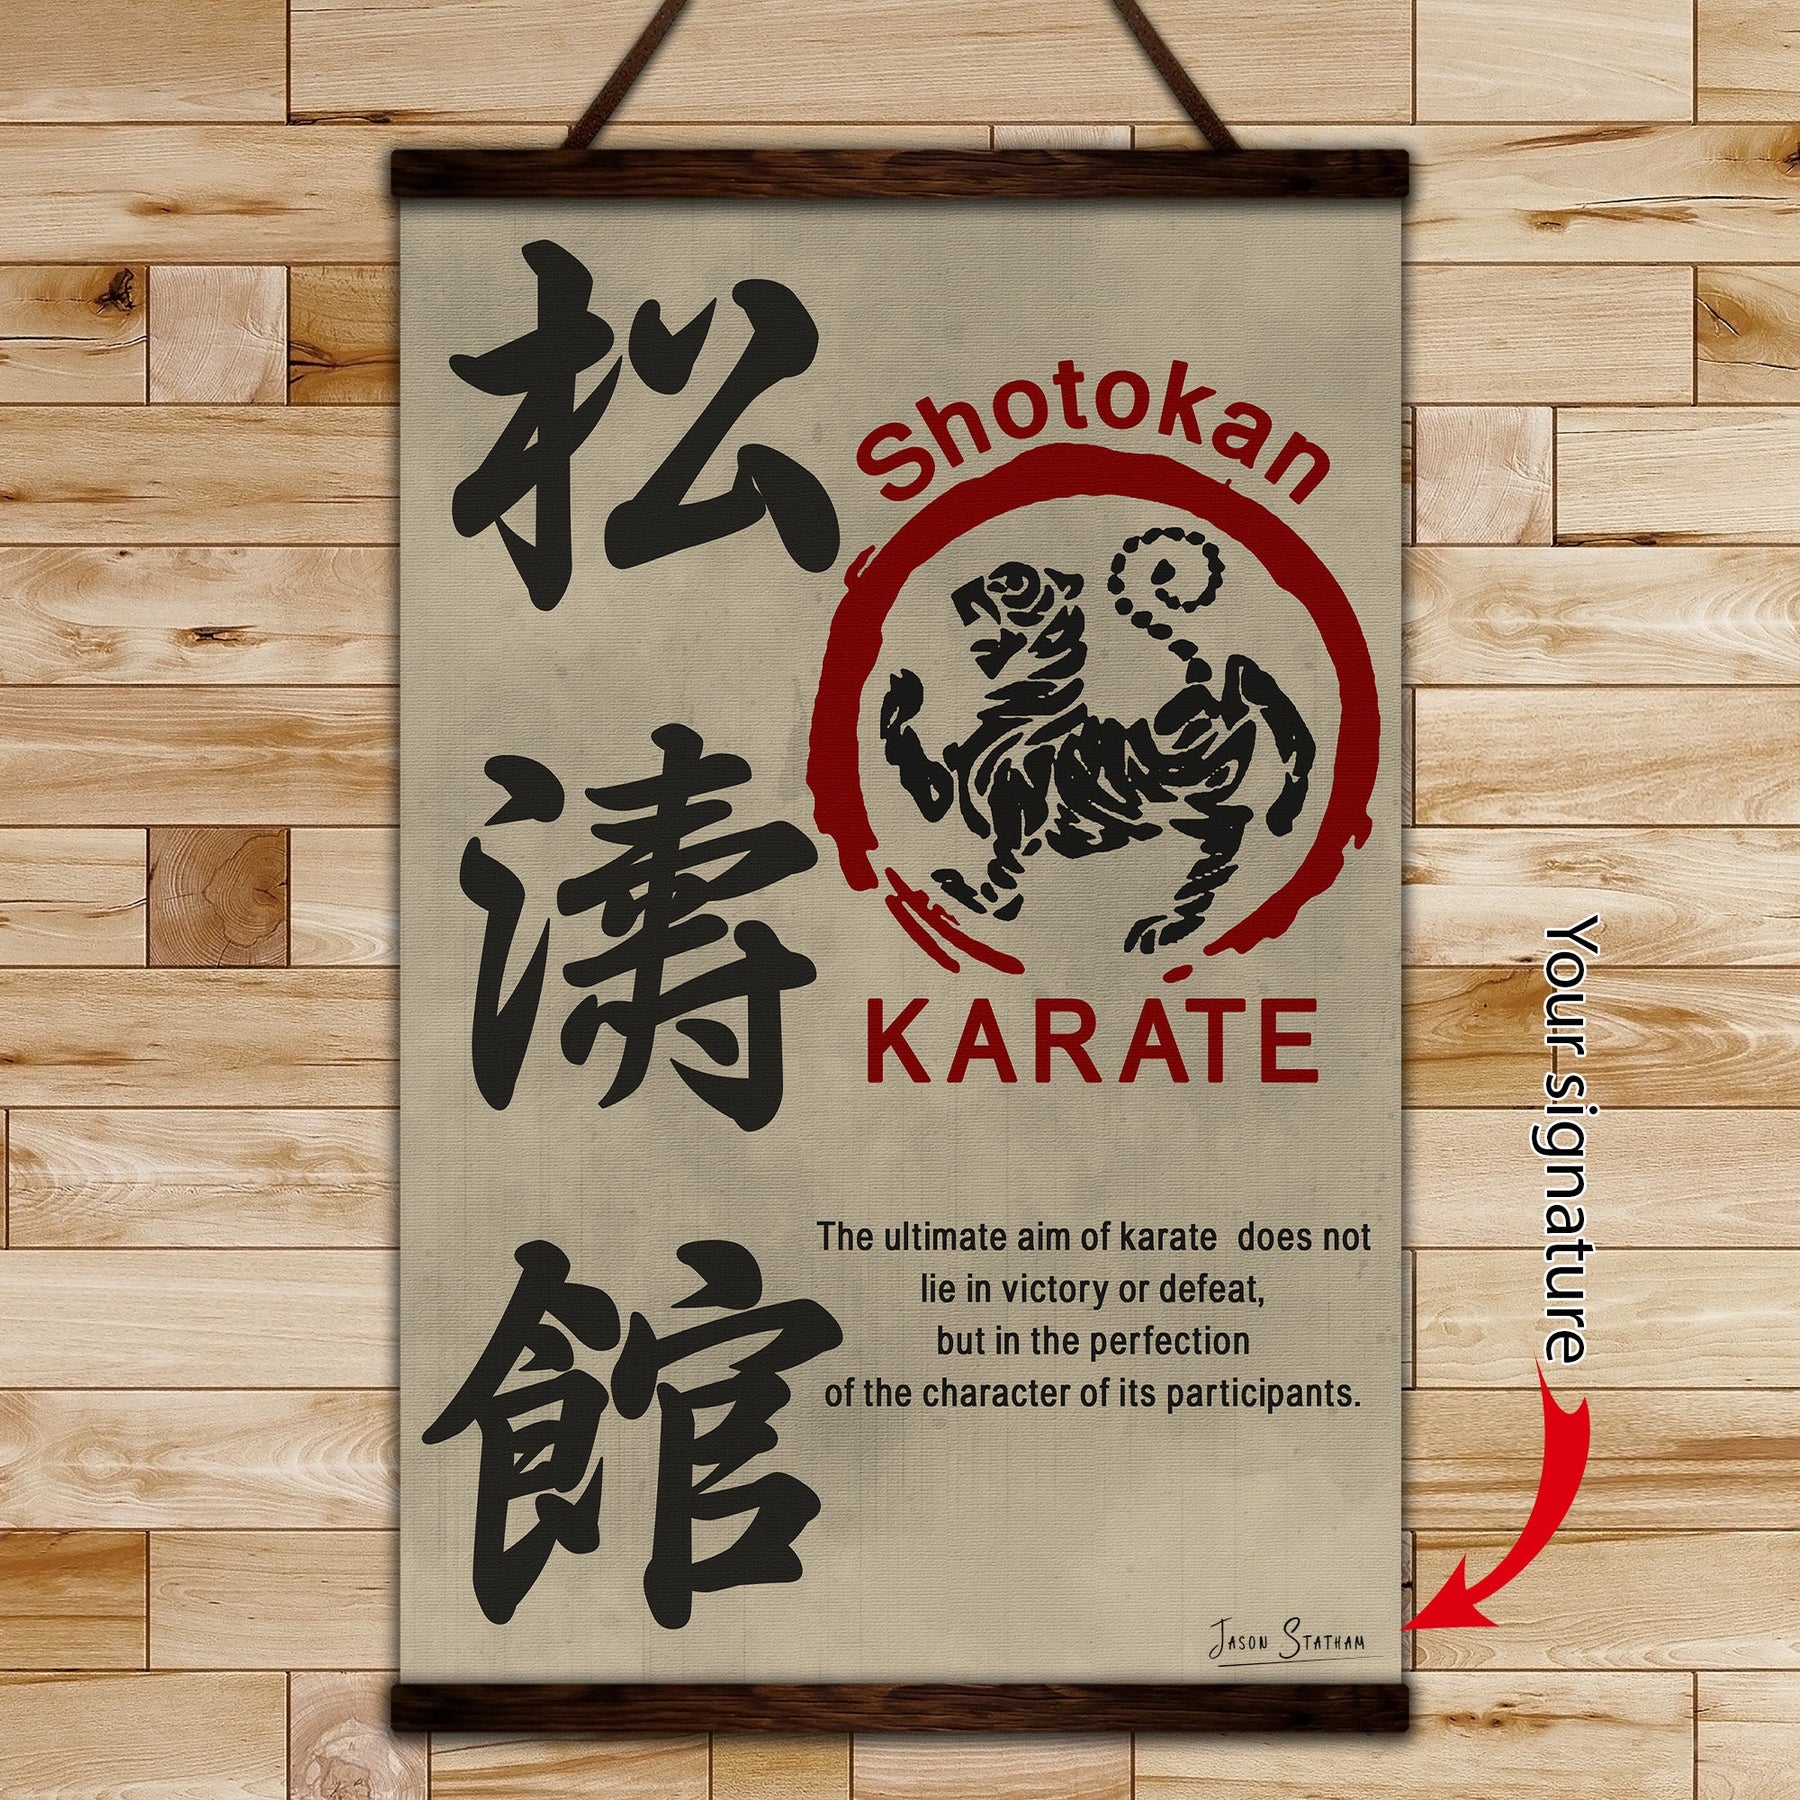 KA030 - The Ultimate Aim Of Karate Lies Not In Victory Or Defeat, But In The Perfection Of The Character Of Its Participants - Gichin Funakoshi - Shotokan Karate - Vertical Poster - Vertical Canvas - Karate Poster